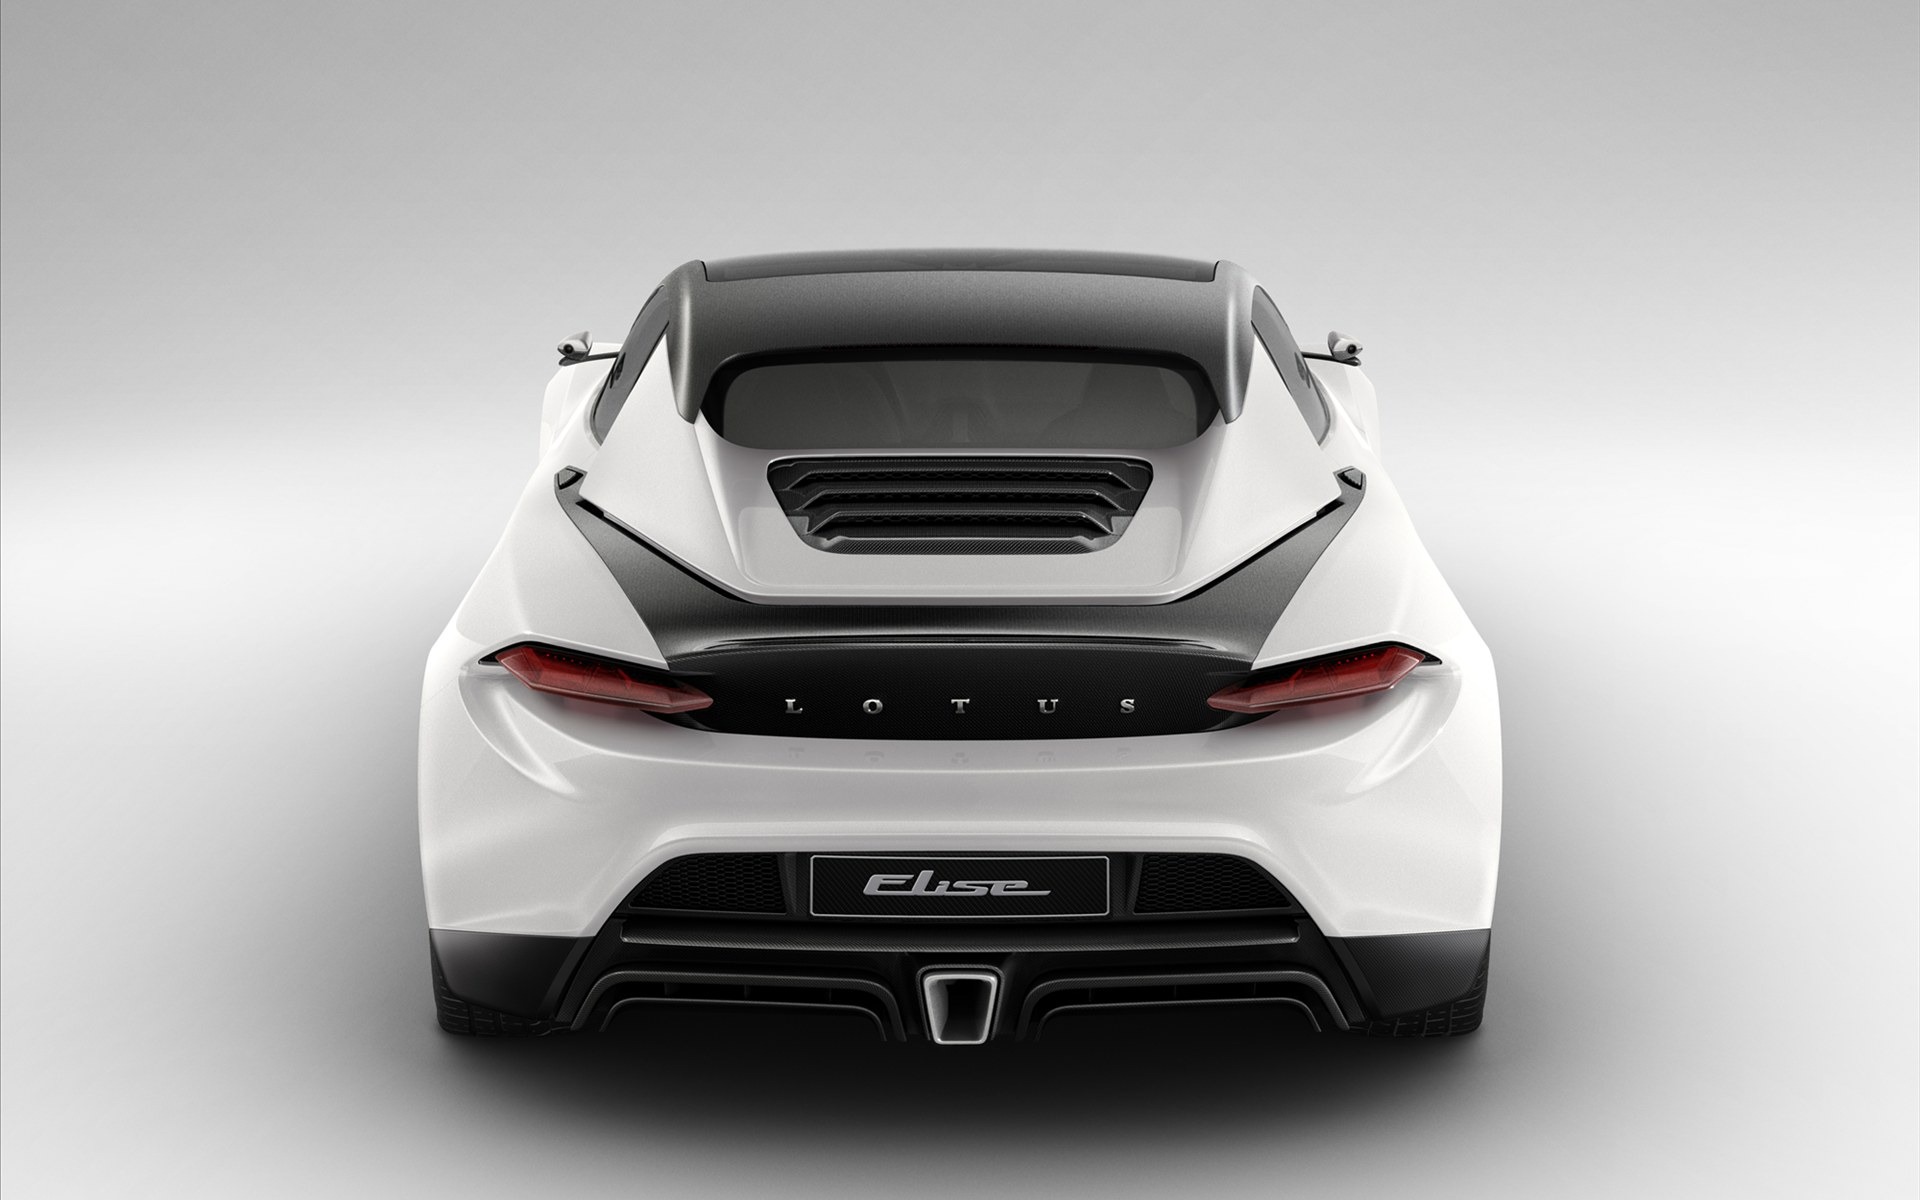 Special edition of concept cars wallpaper (15) #15 - 1920x1200